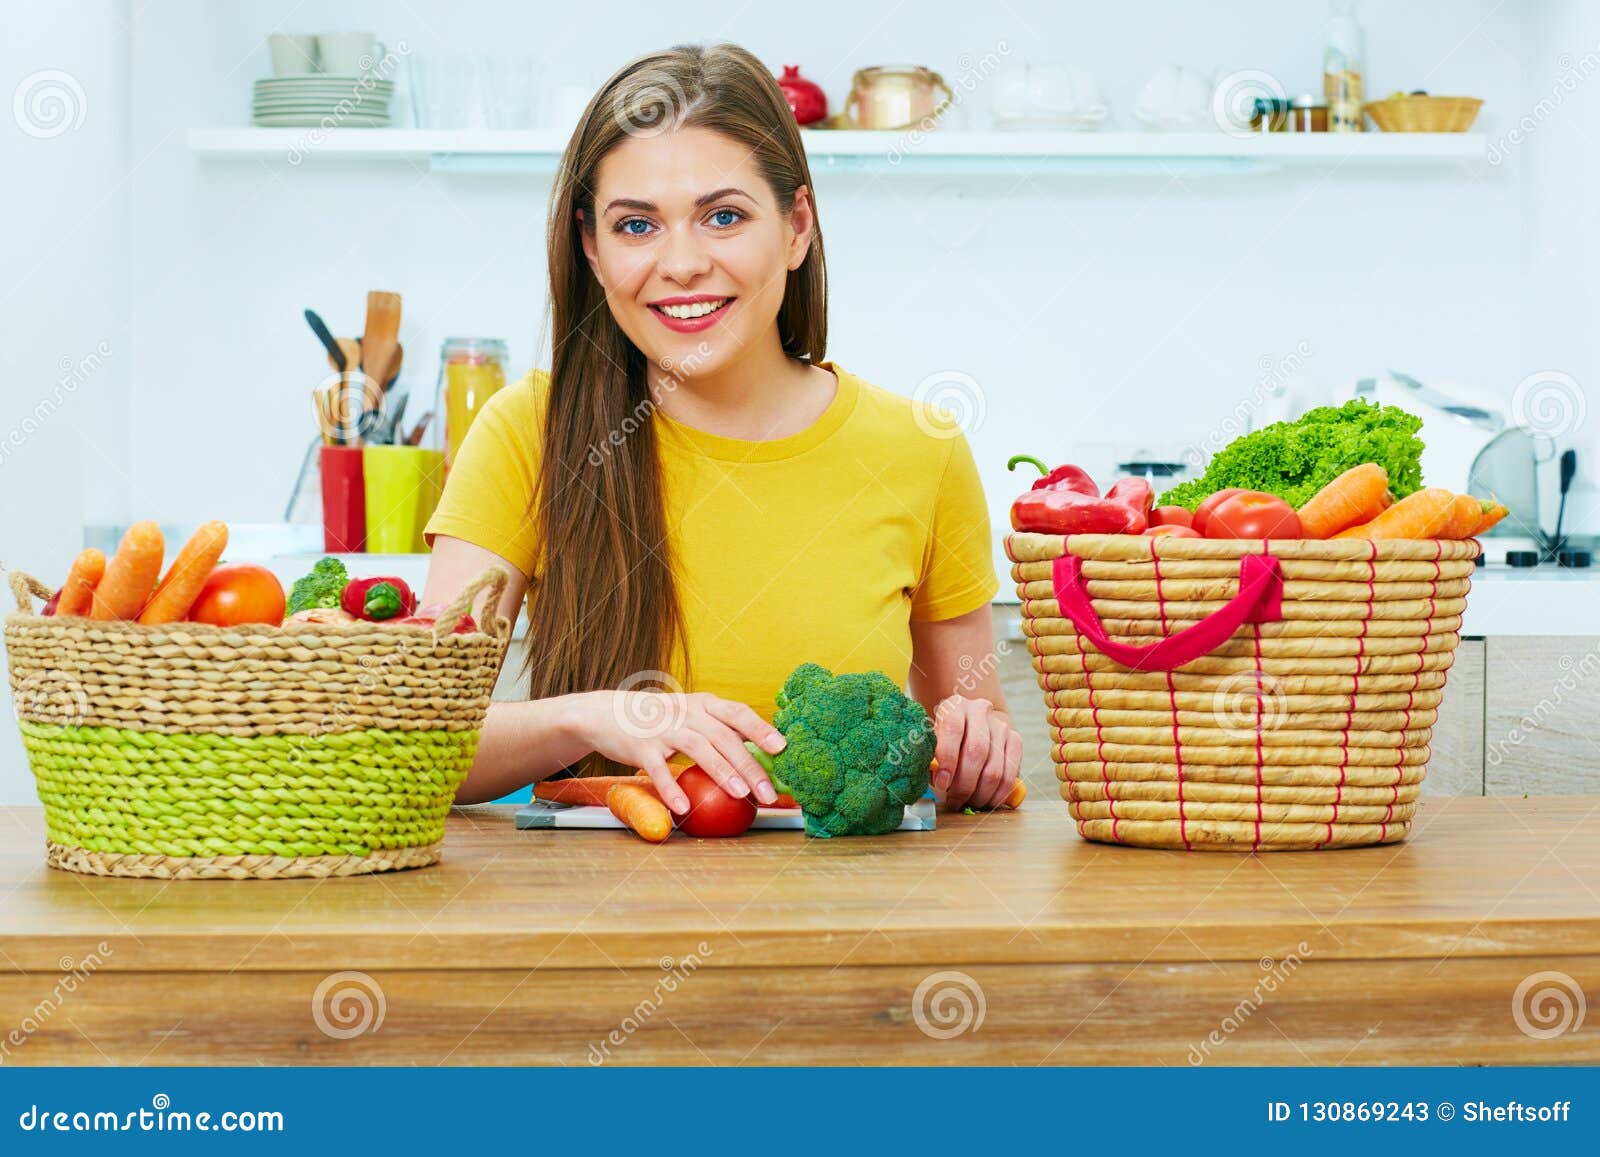 Young Woman Cooking Food In Kitchen Stock Image Image Of Hous